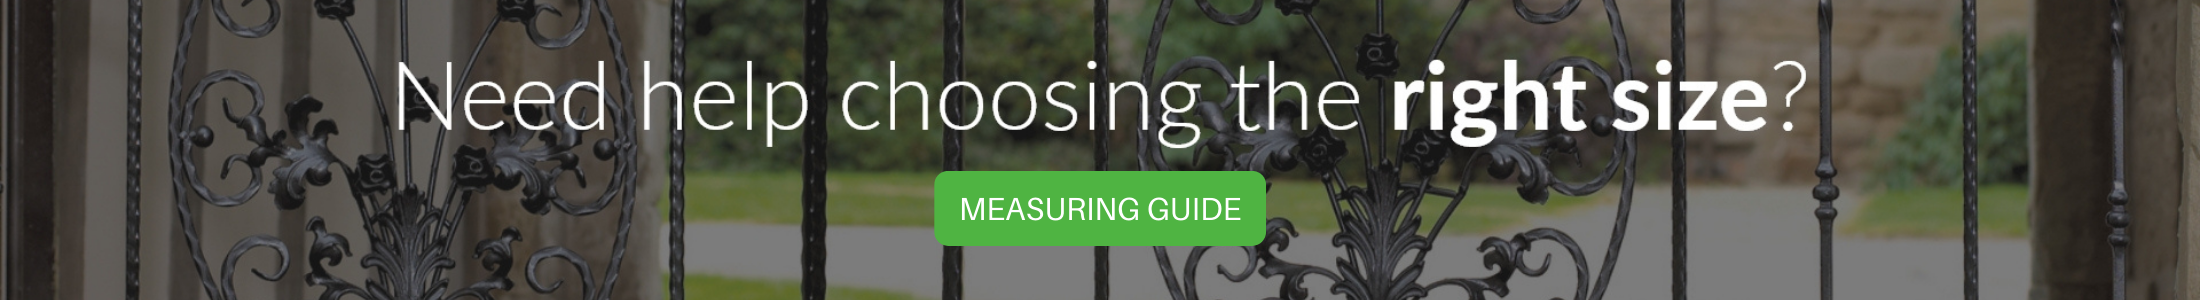 View the measuring guide for more information about ordering sizes